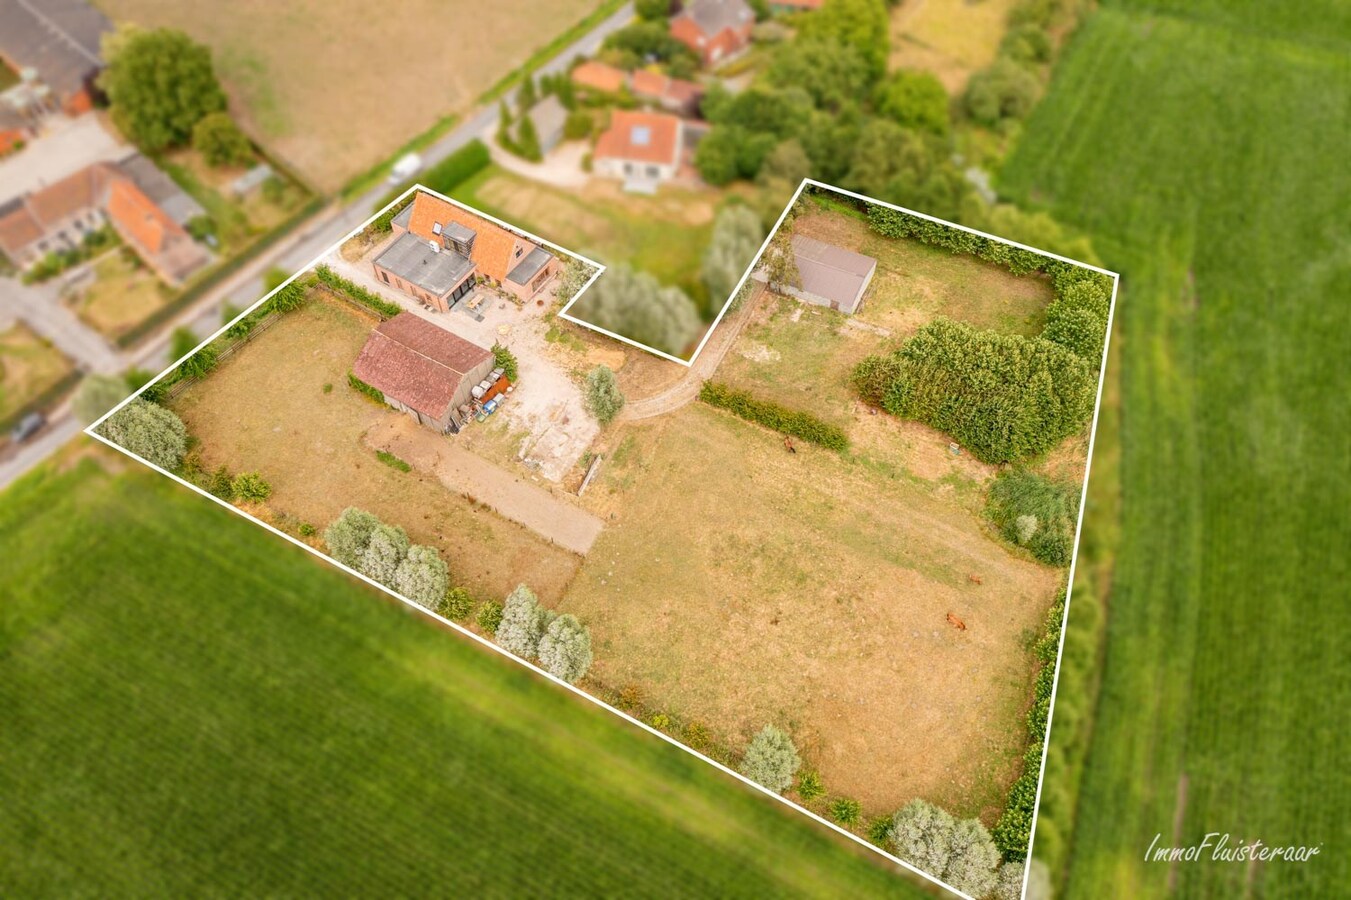 Rural property located in Aalter, Lotenhulle, on approximately 8,000 m2. 